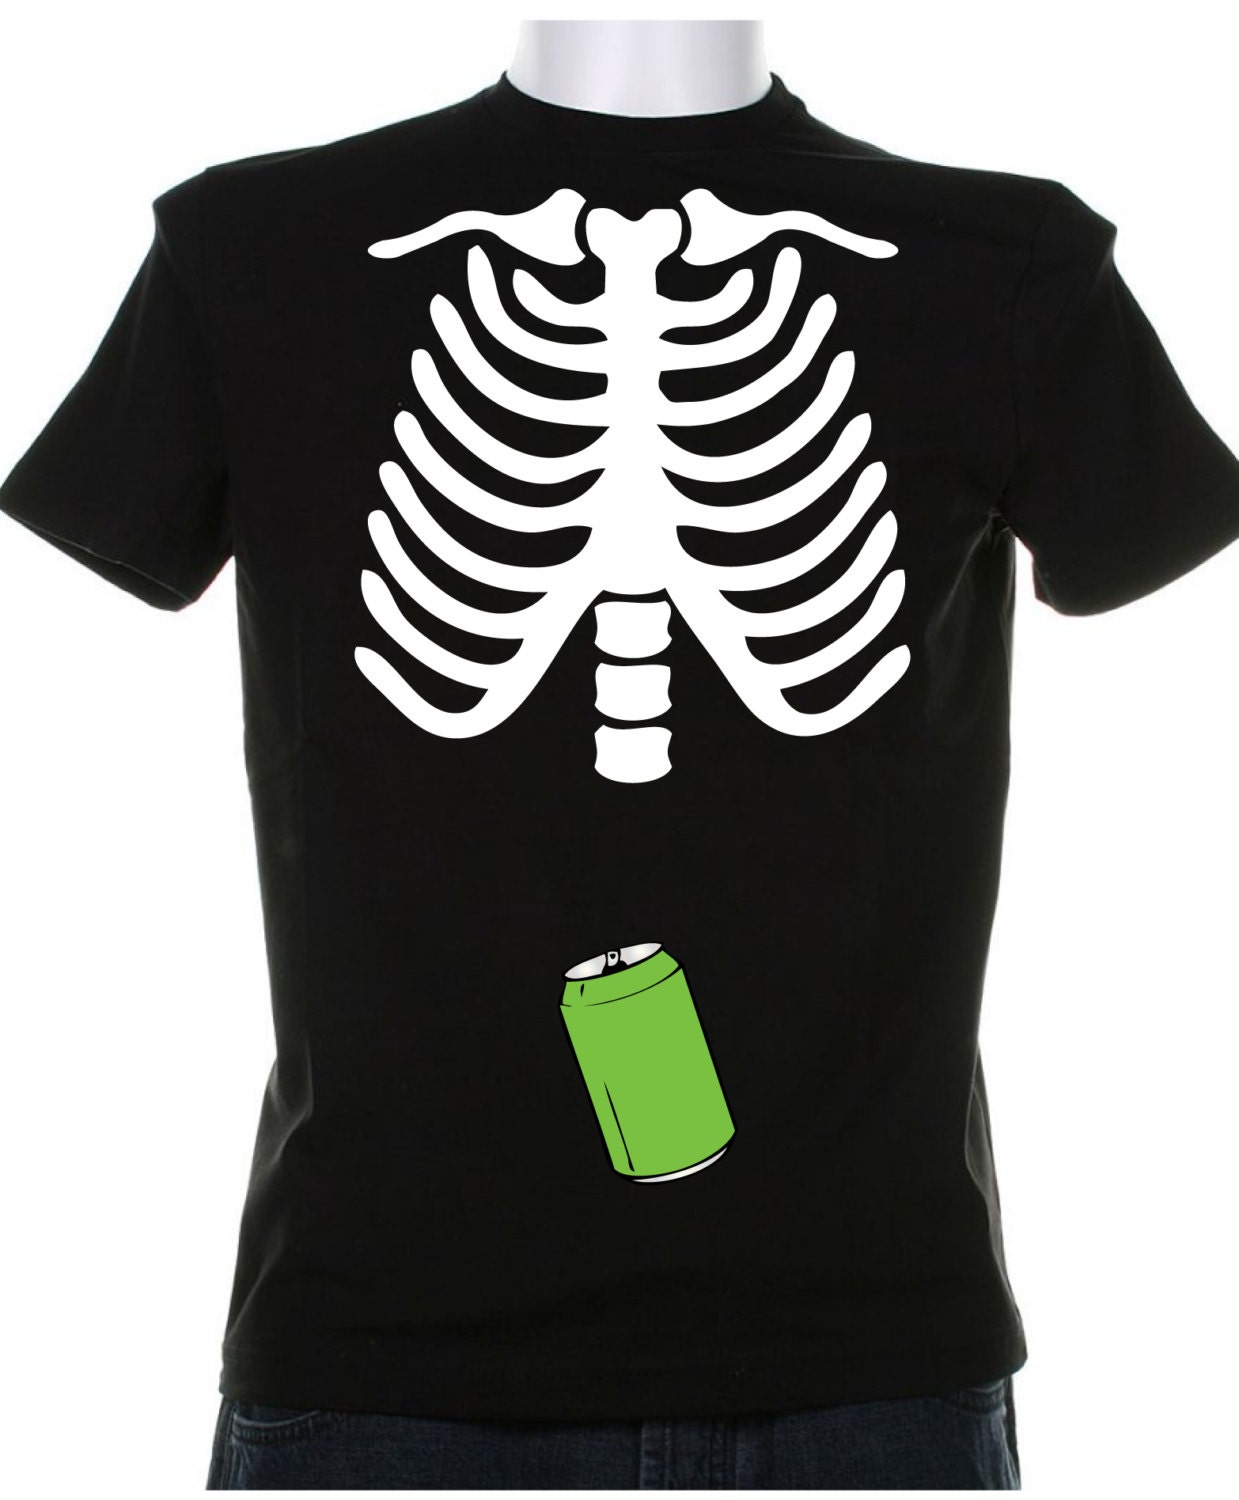 Halloween Skeleton Shirt FOR DAD Halloween Costume by ...